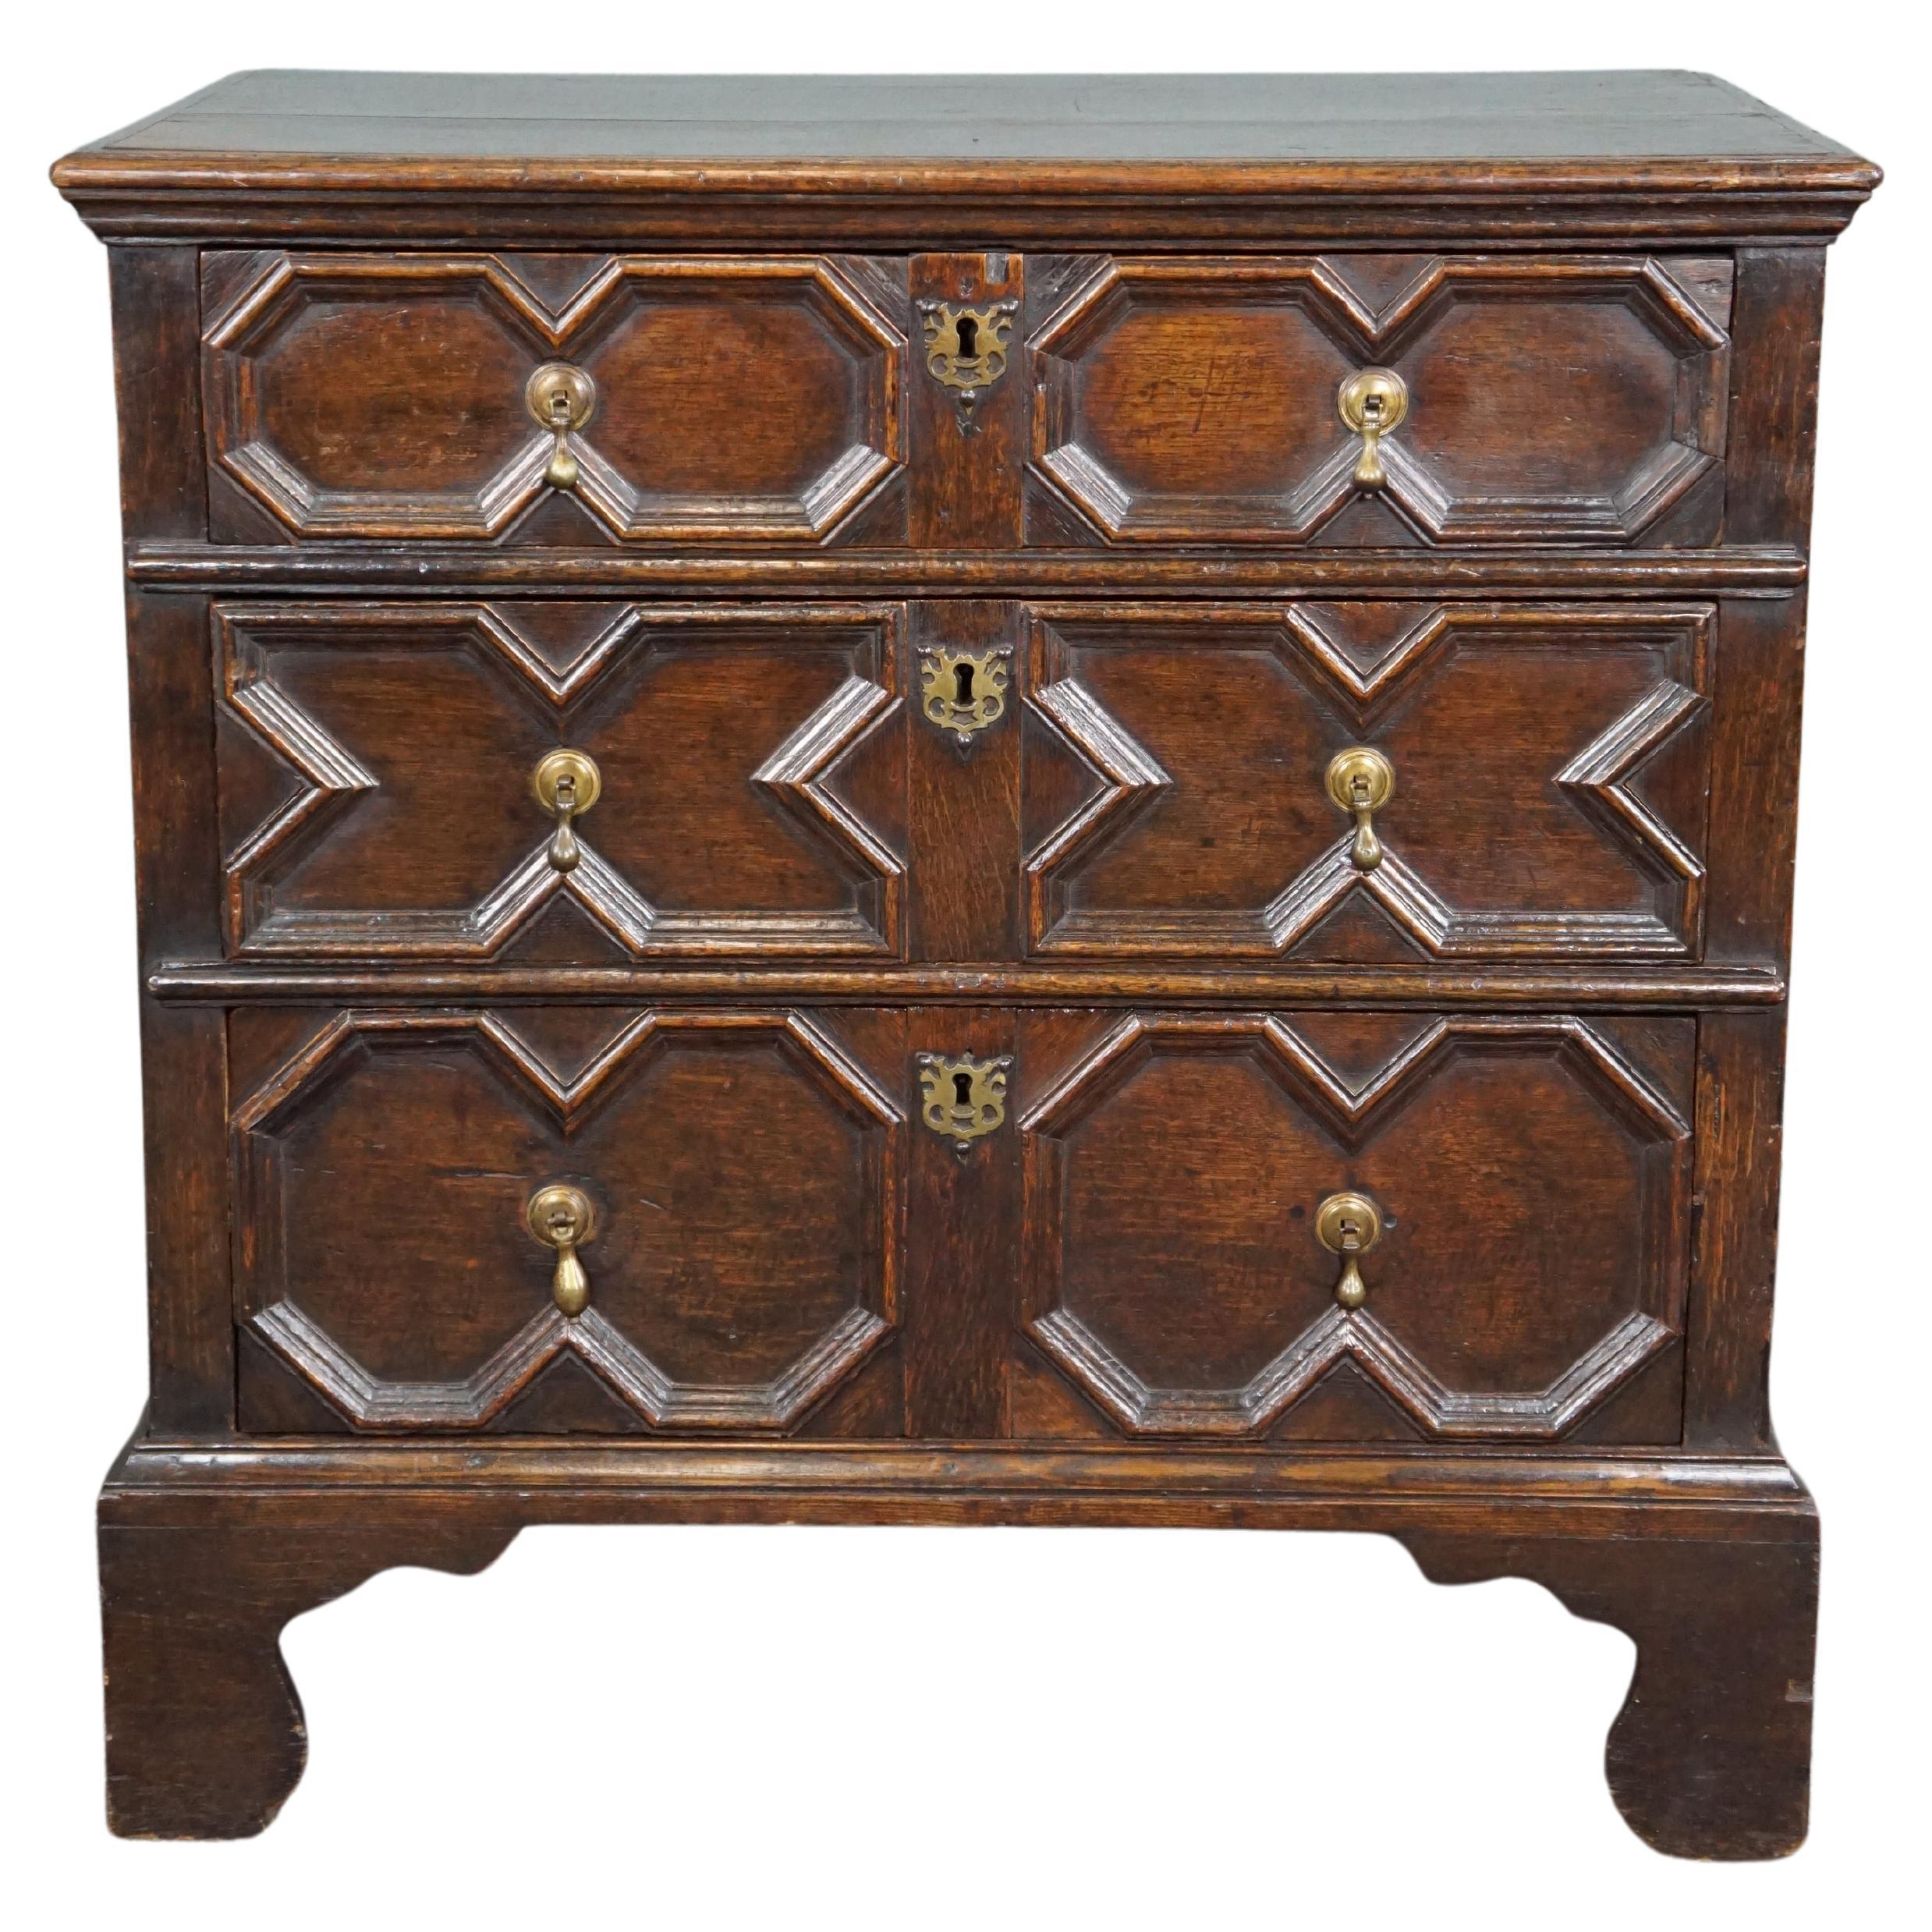 Very charming antique English wooden chest of drawers, 18th century